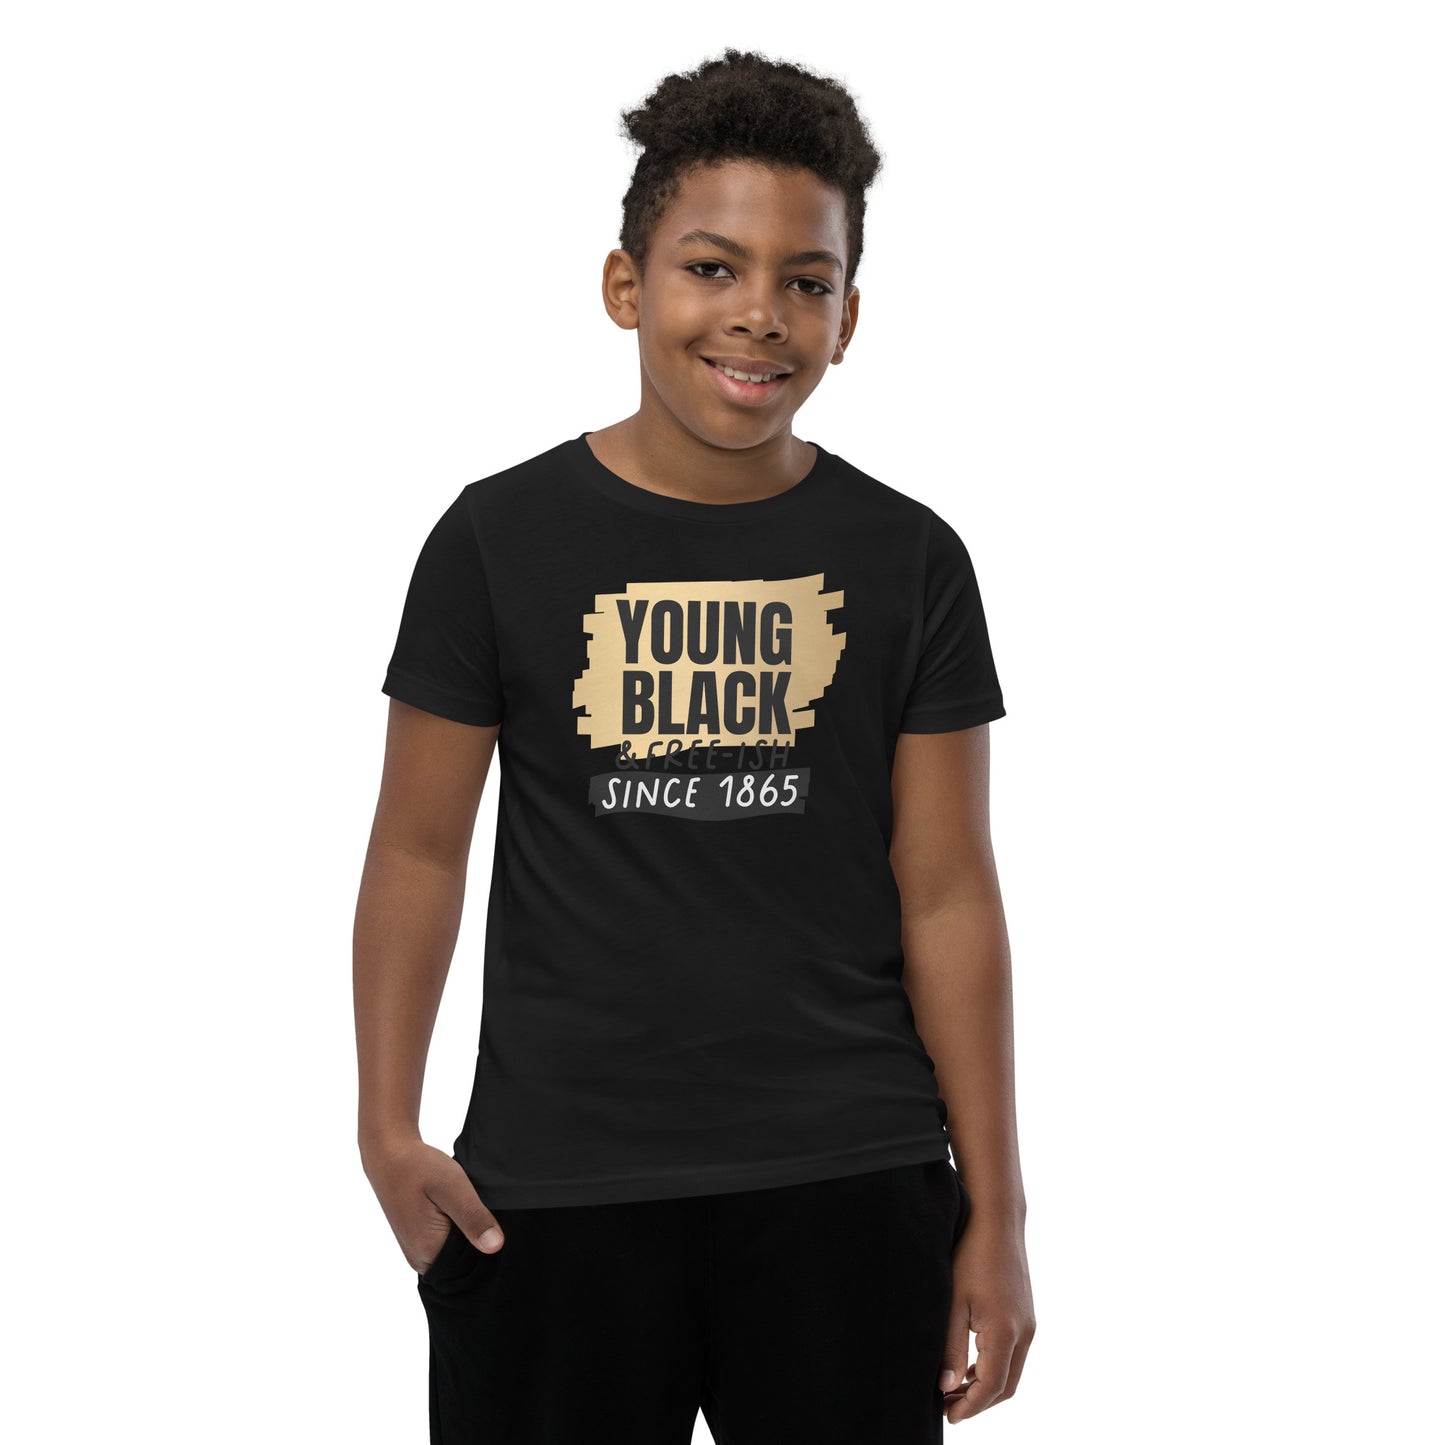 Youth Short Sleeve T-Shirt - Juneteenth Young Black Freeish Since 1865